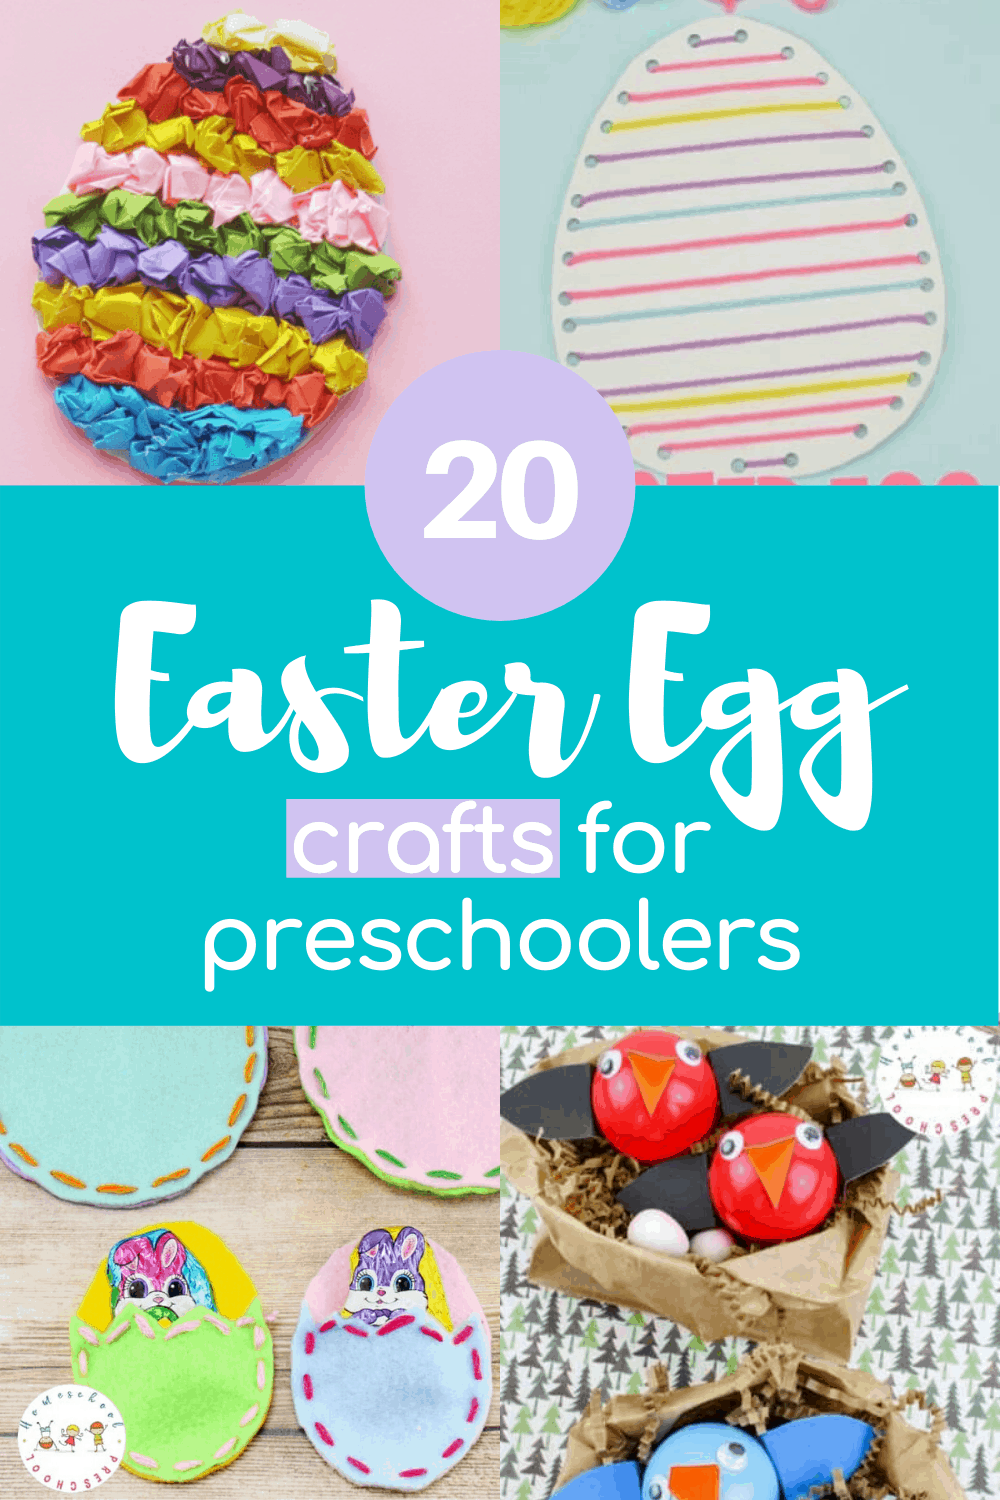 Make Easter more fun with this selection of creative Easter Egg crafts for kids. You'll find paper plate crafts, recycled crafts, and more!